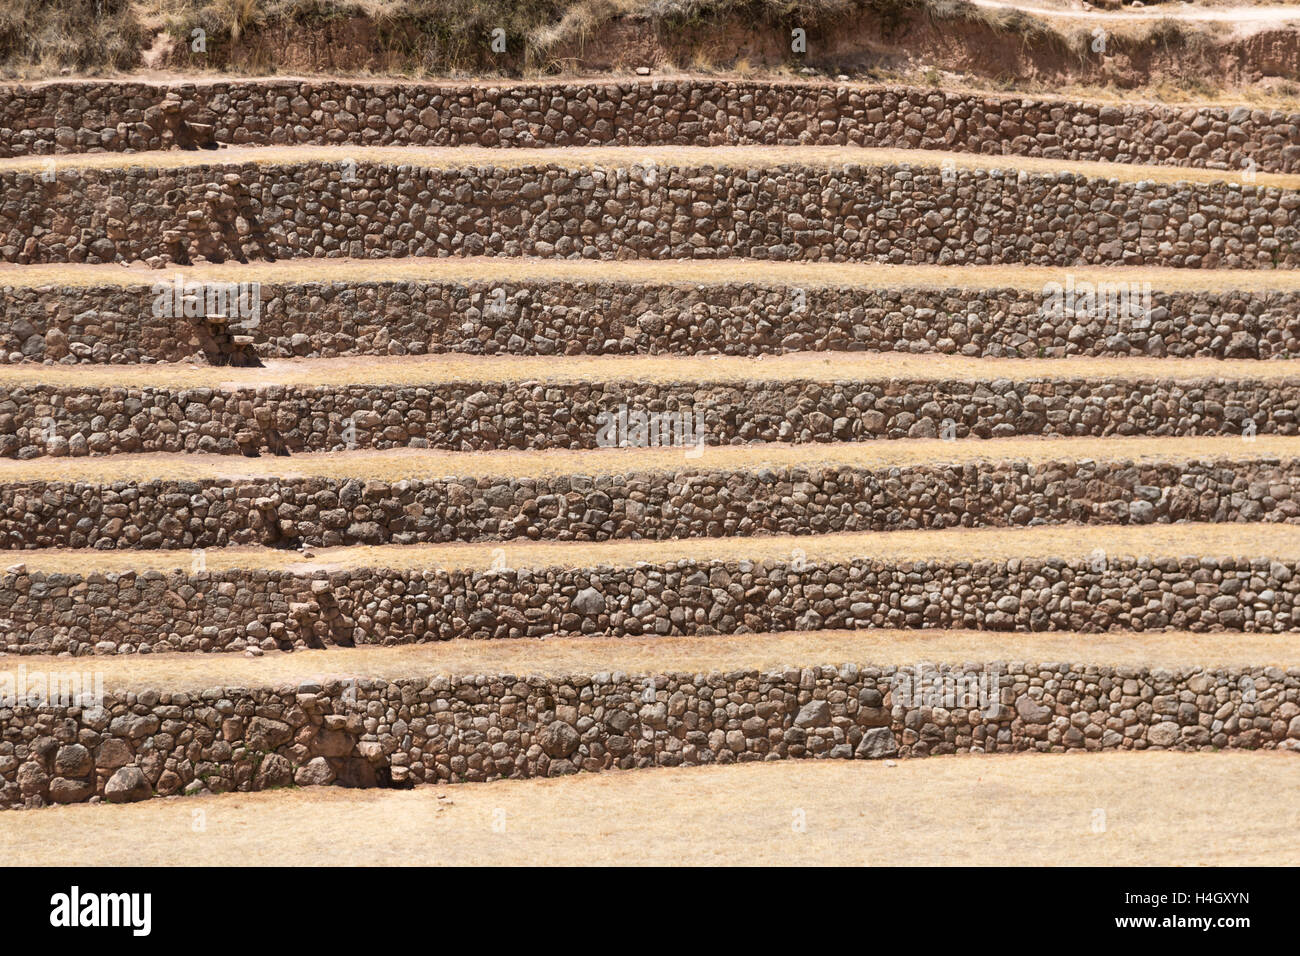 Detail of the stone farming terraces at Moray Archaeological Sight near Cusco, Peru Stock Photo